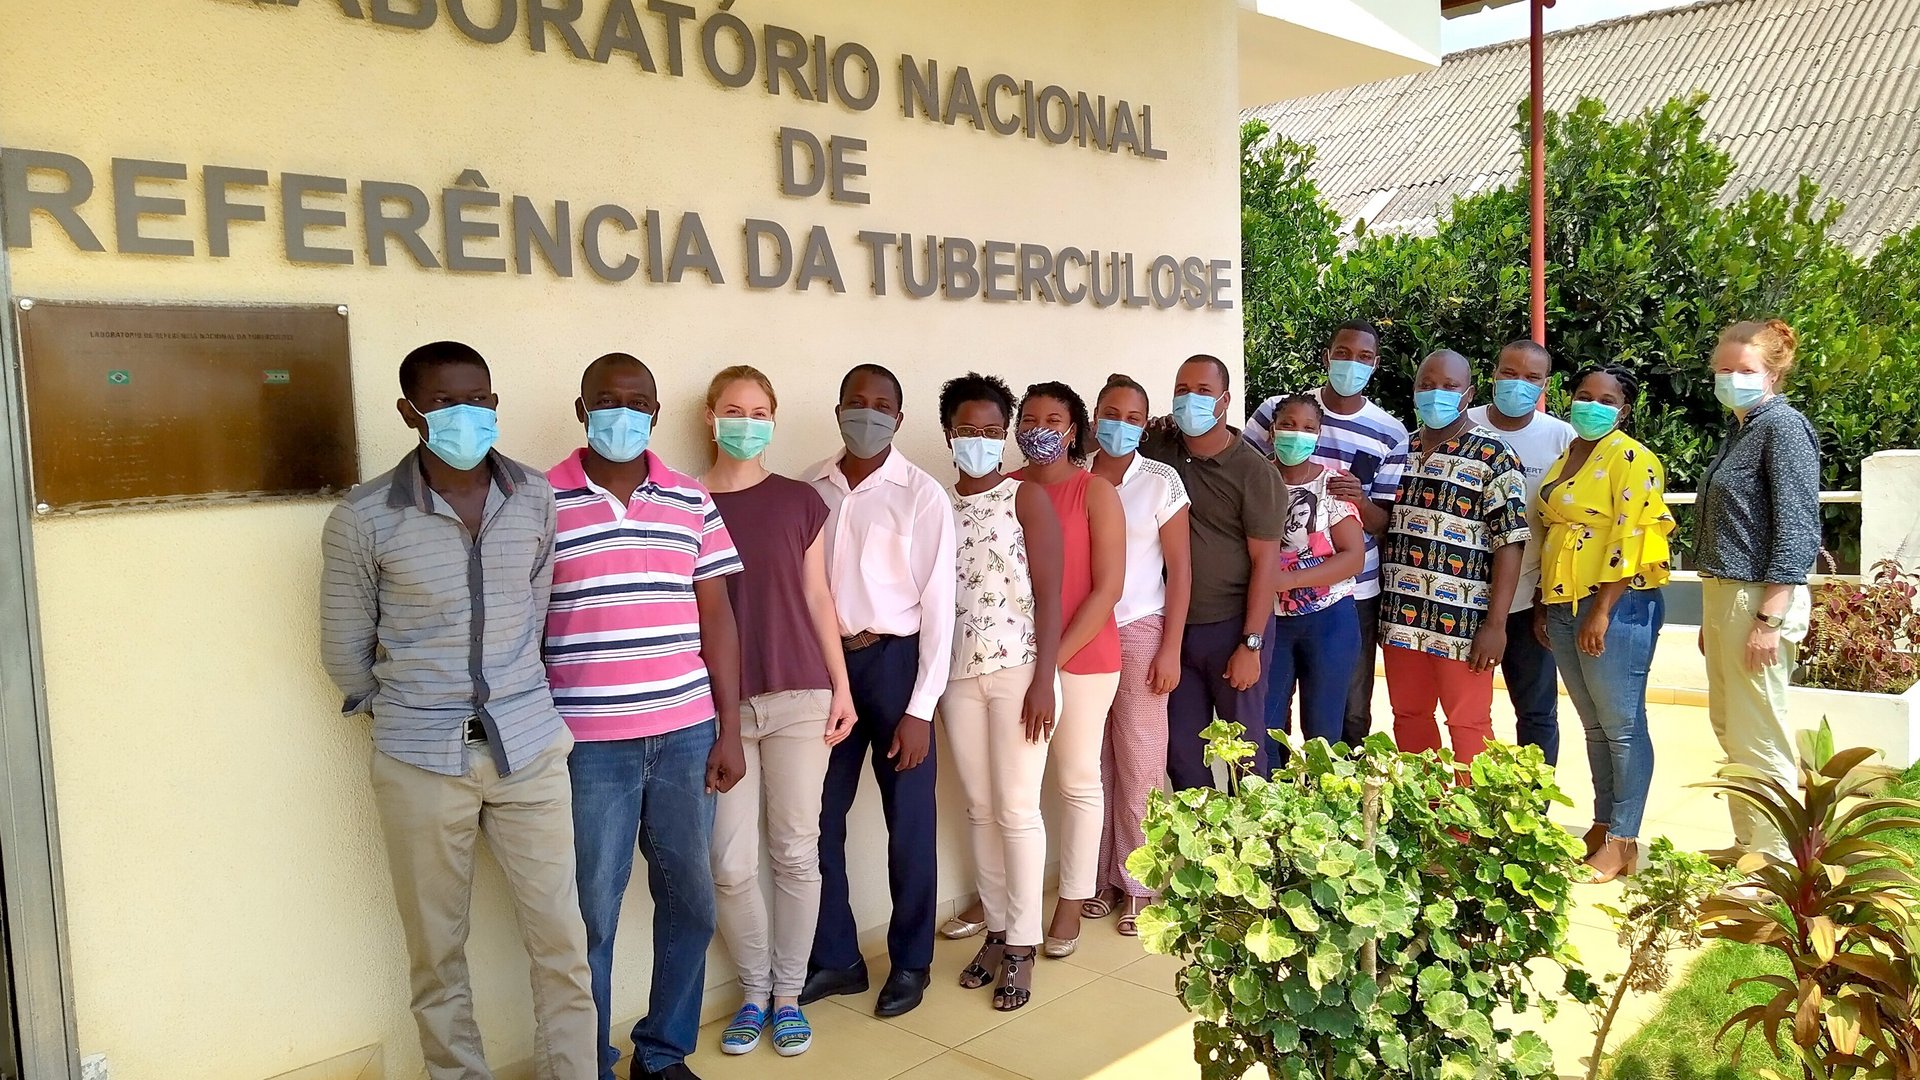 Projectstaff in front of the National Reference Laboratory for Tuberculosis in São Tomé and Príncipe